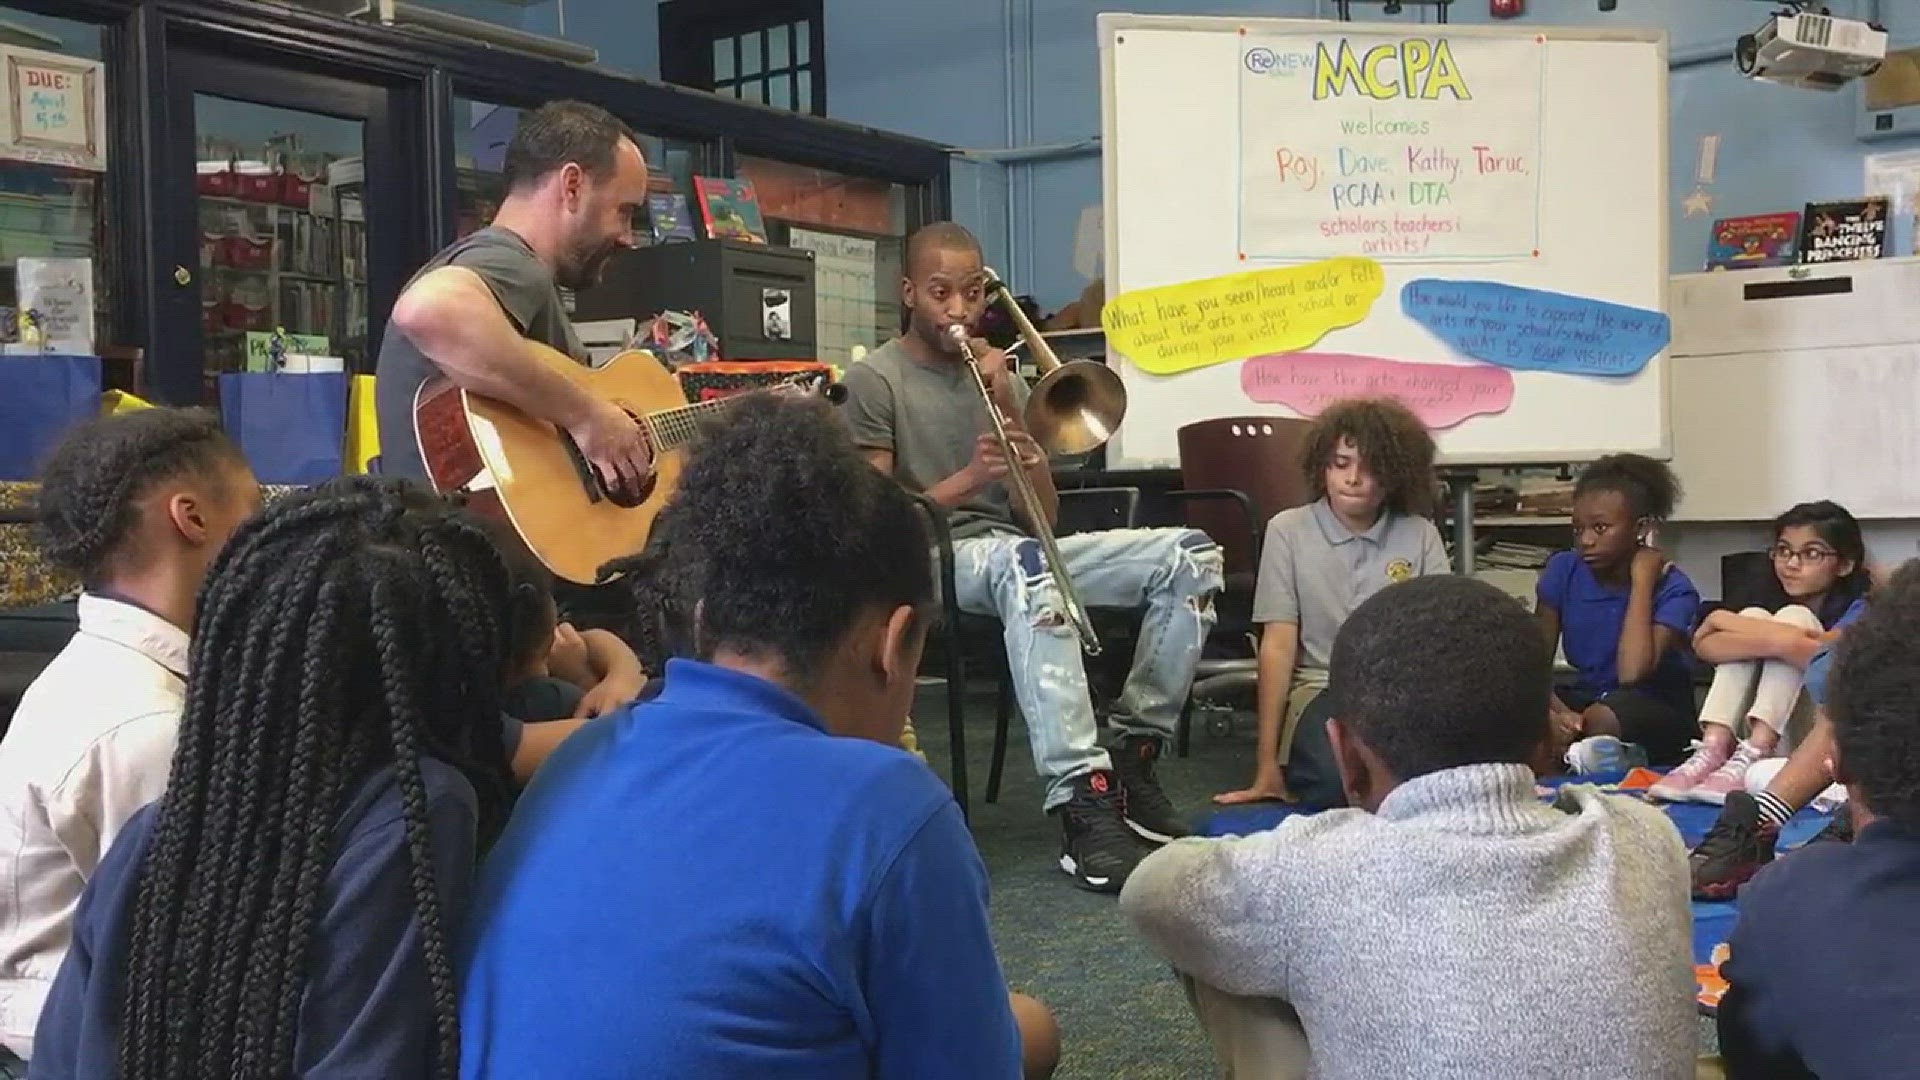 Two big names in music surprised students in New Orleans with a mini concert. Dave Matthews and Trombone Shorty are scheduled to perform at Jazz Fest this weekend.